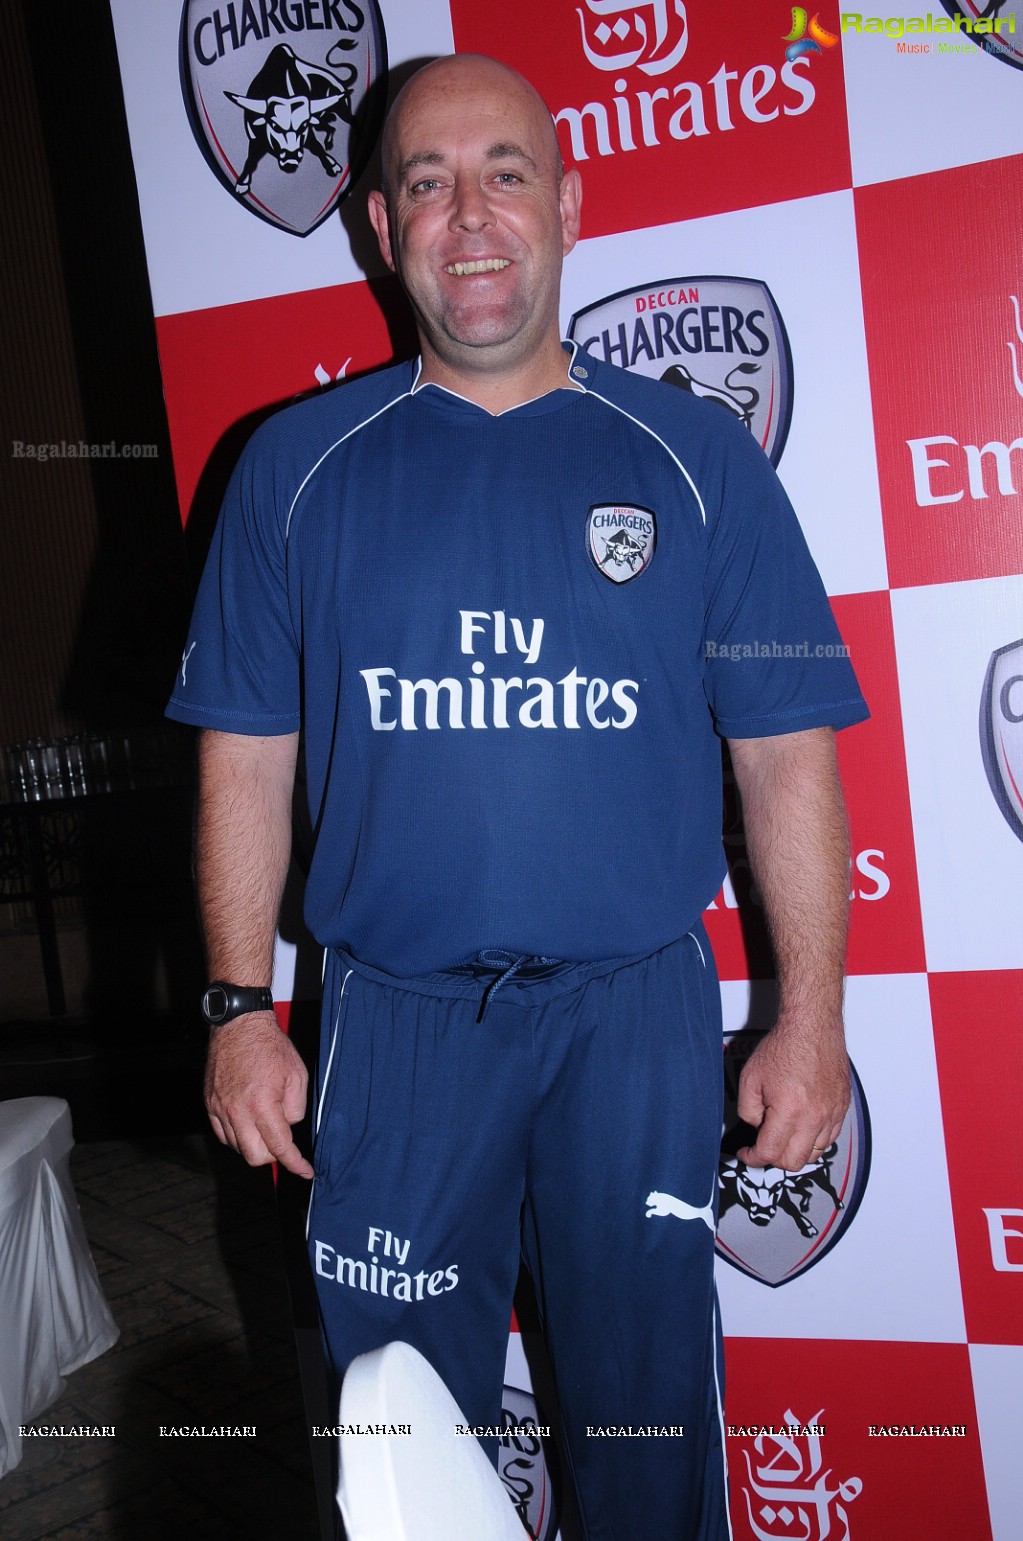 Emirates to Sponsor IPL Franchise Deccan Chargers - Press Meet